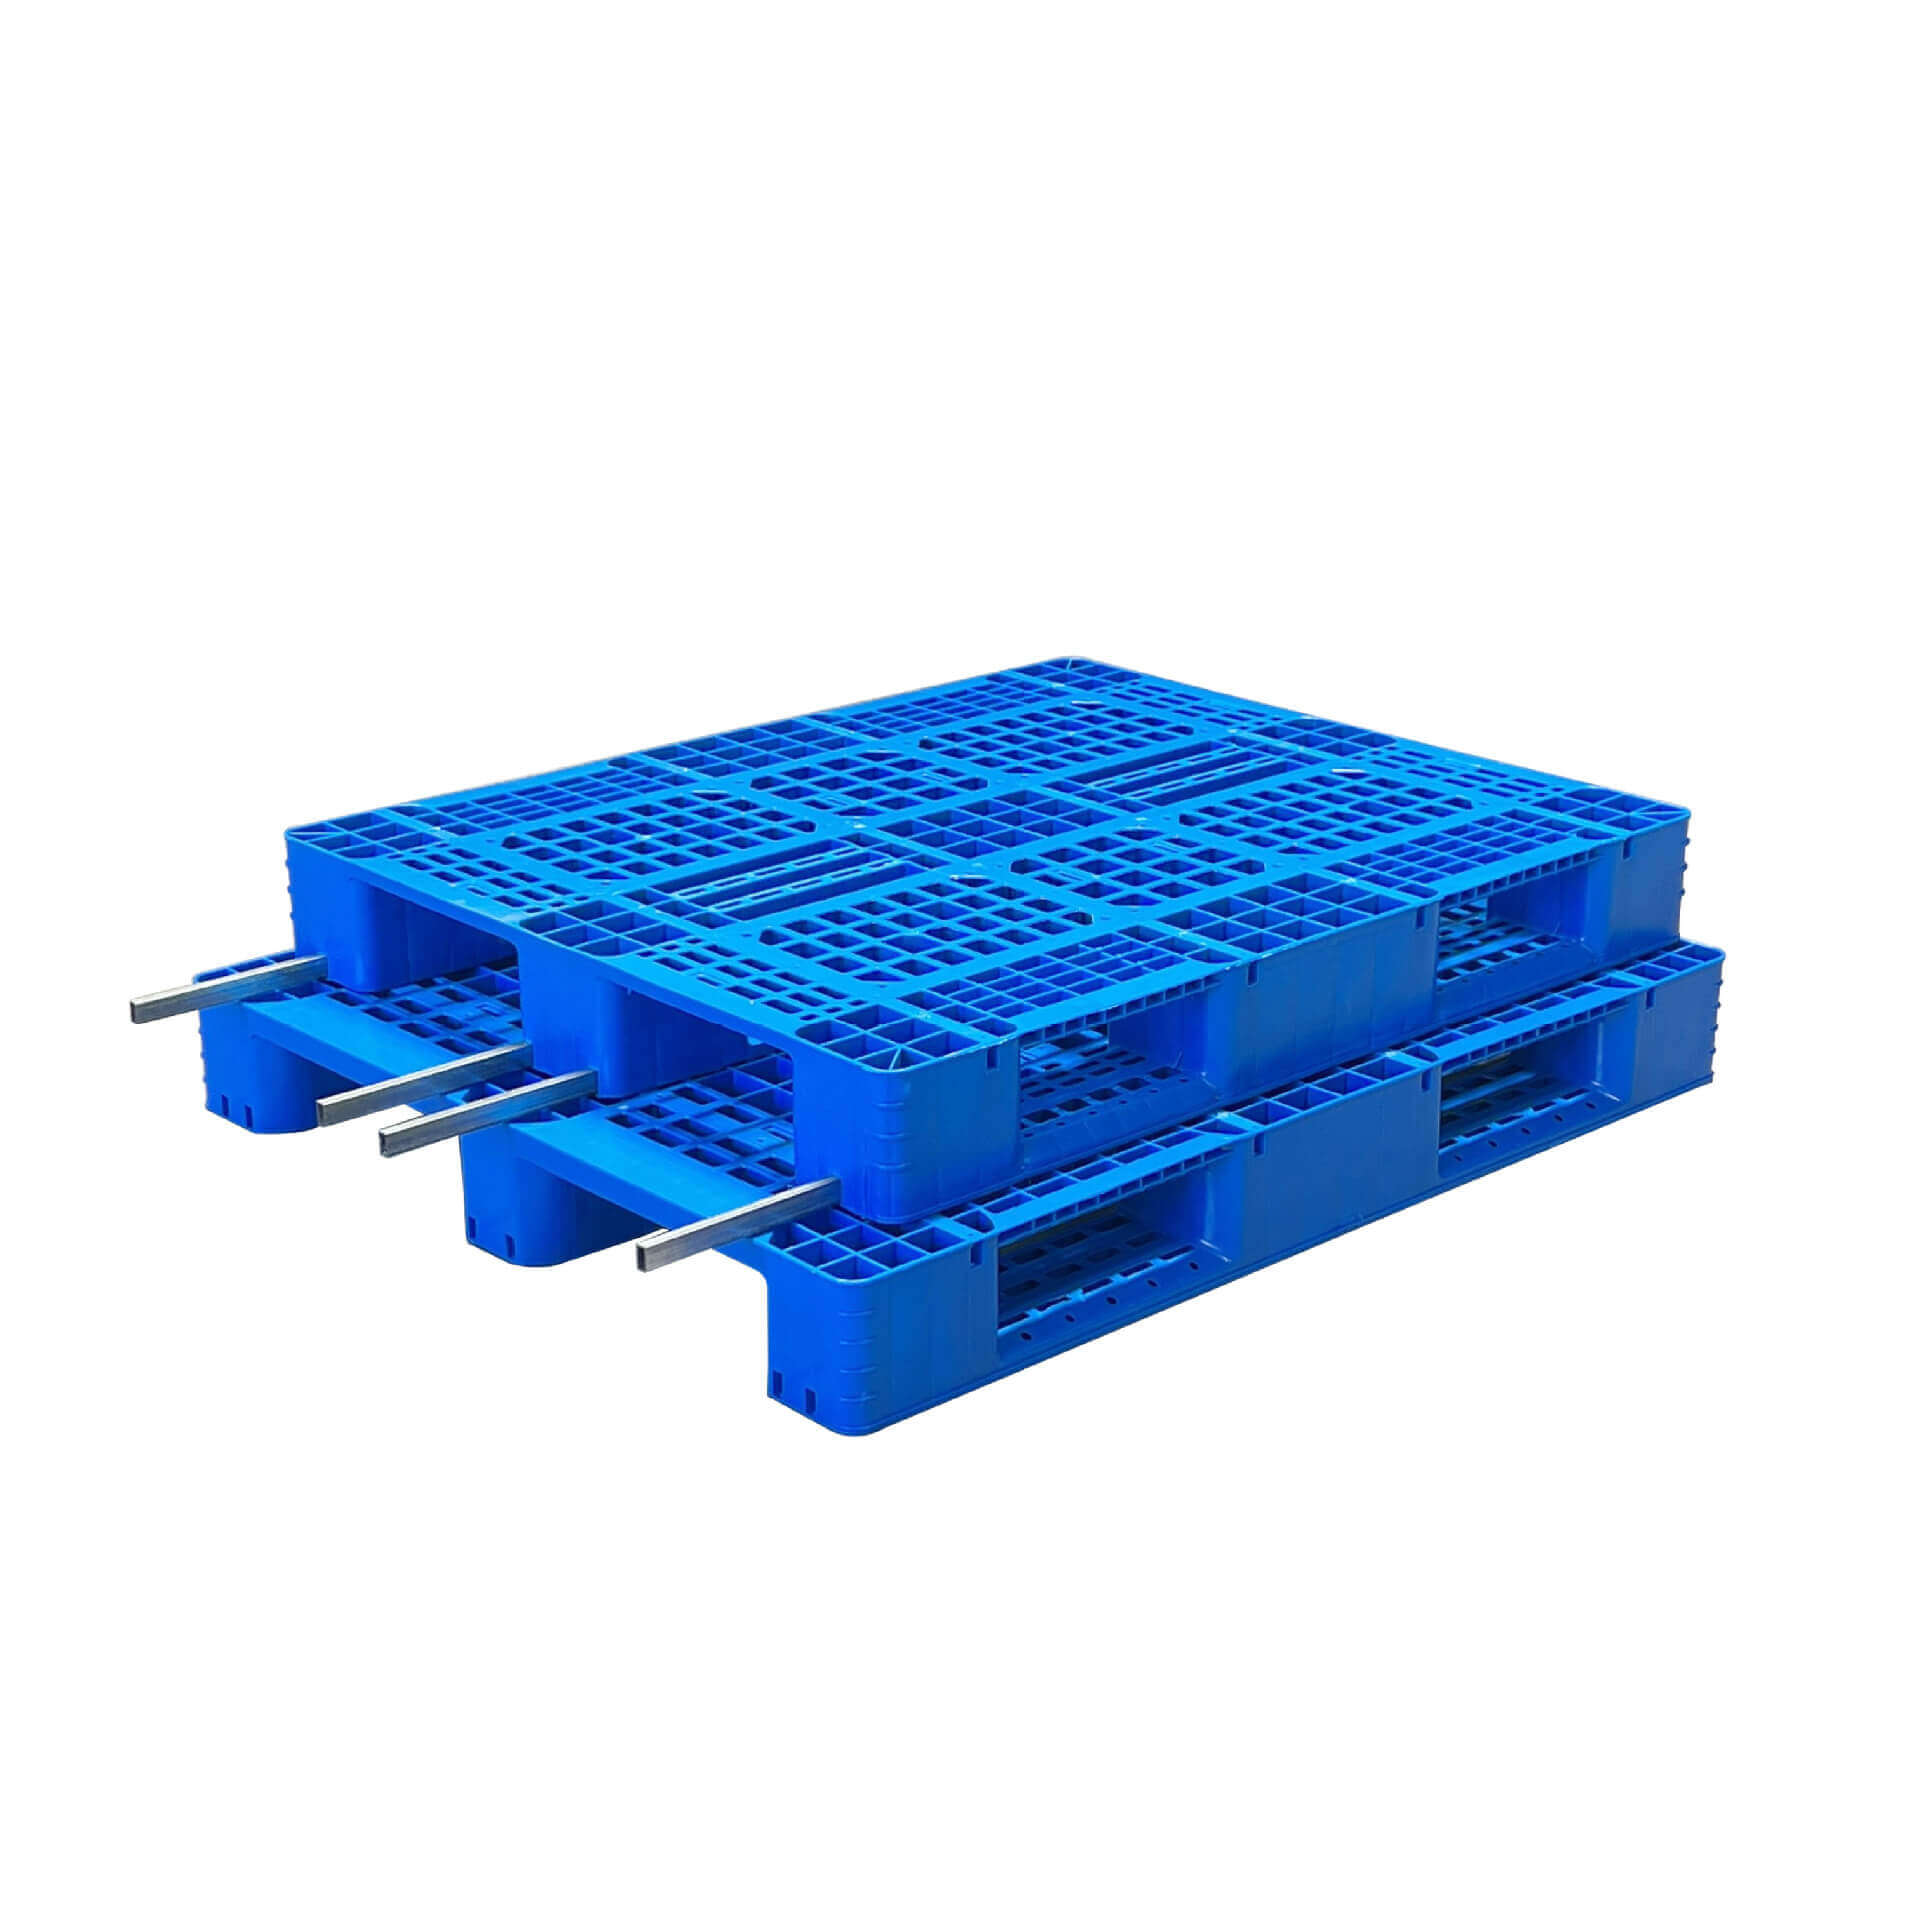 What are the advantages of plastic pallets compared to other types of pallets?